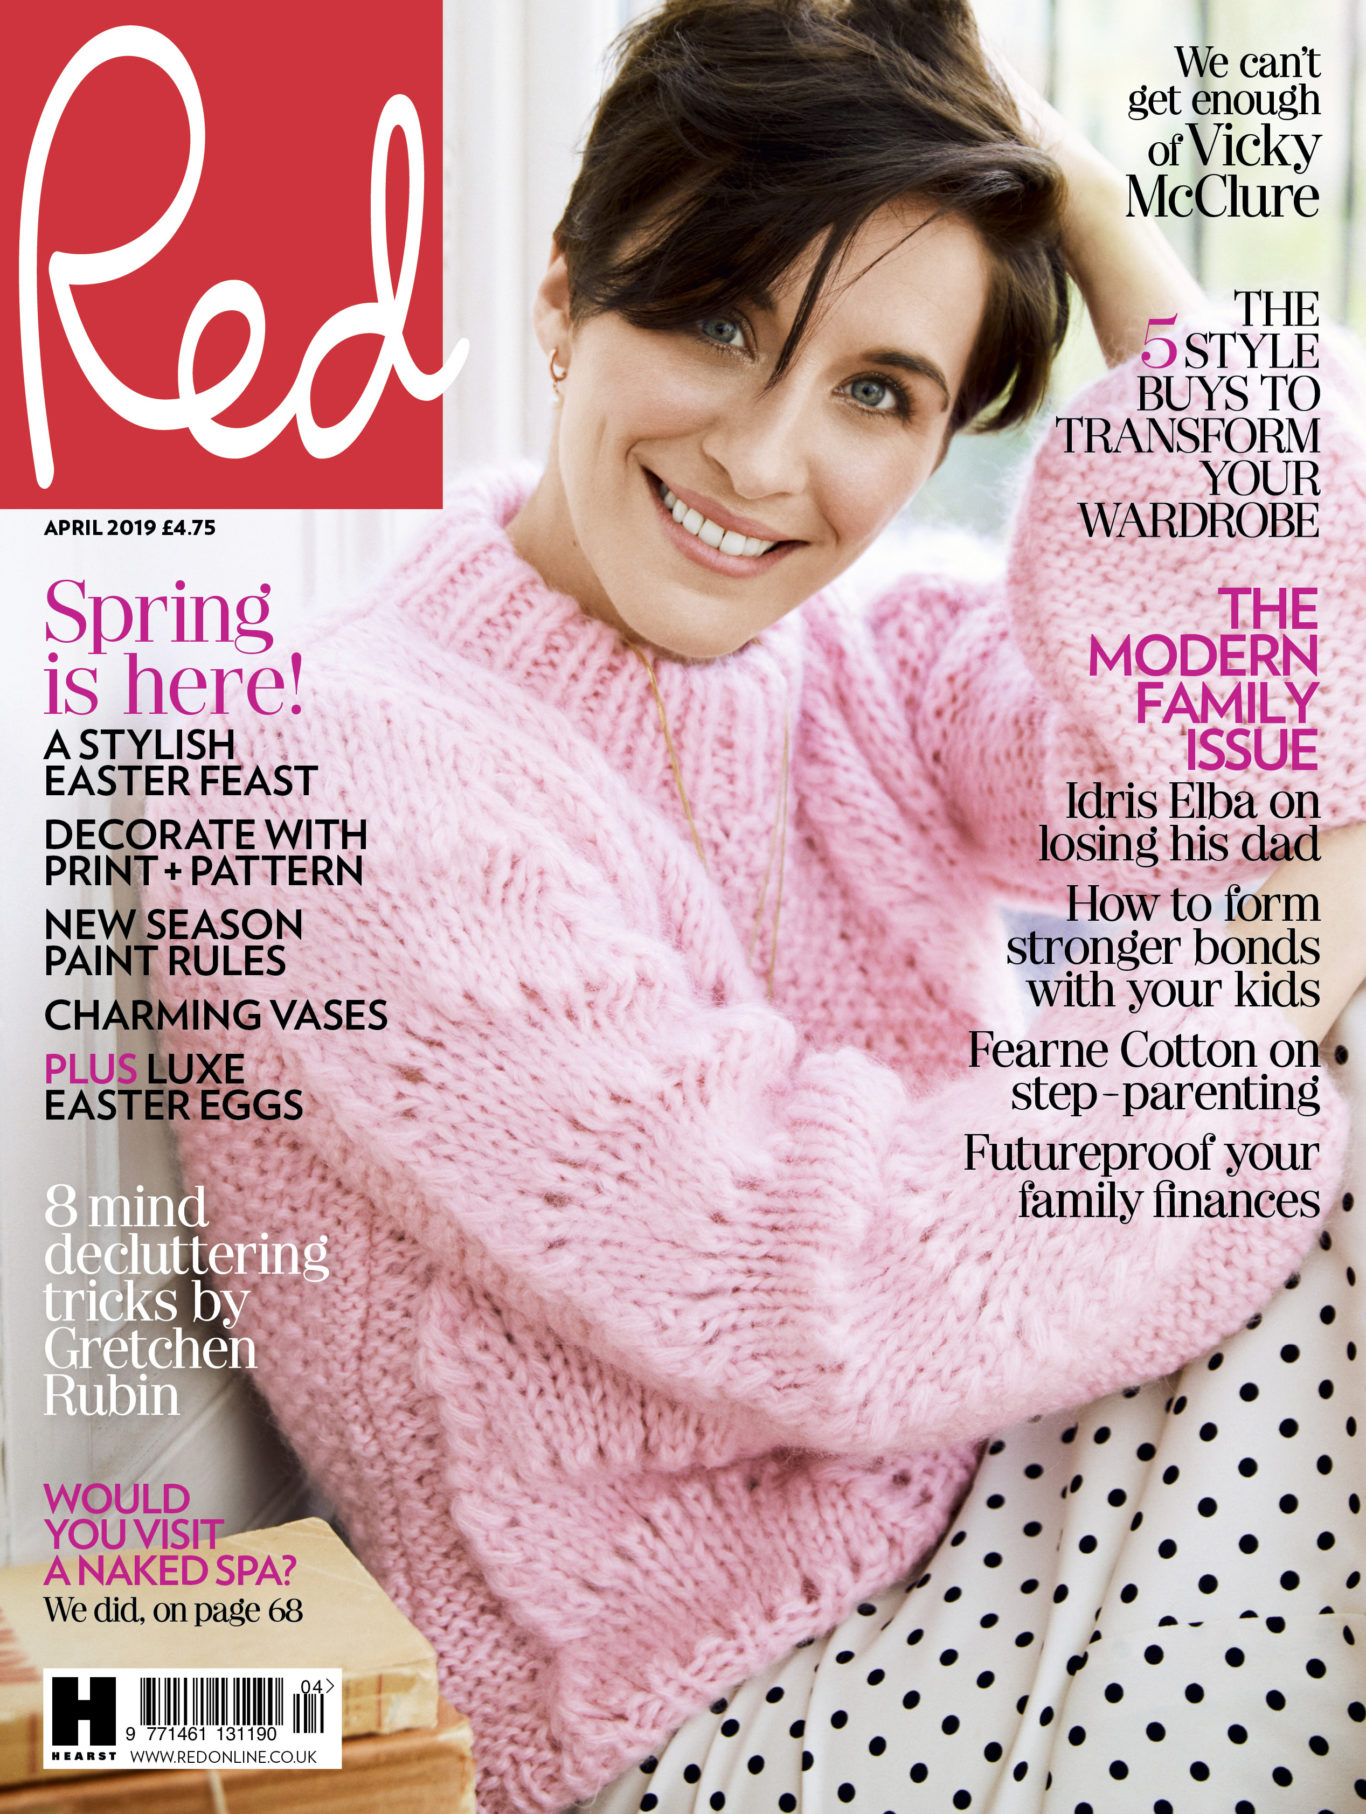 The April issue of Red Magazine features a full interview with cover star V...